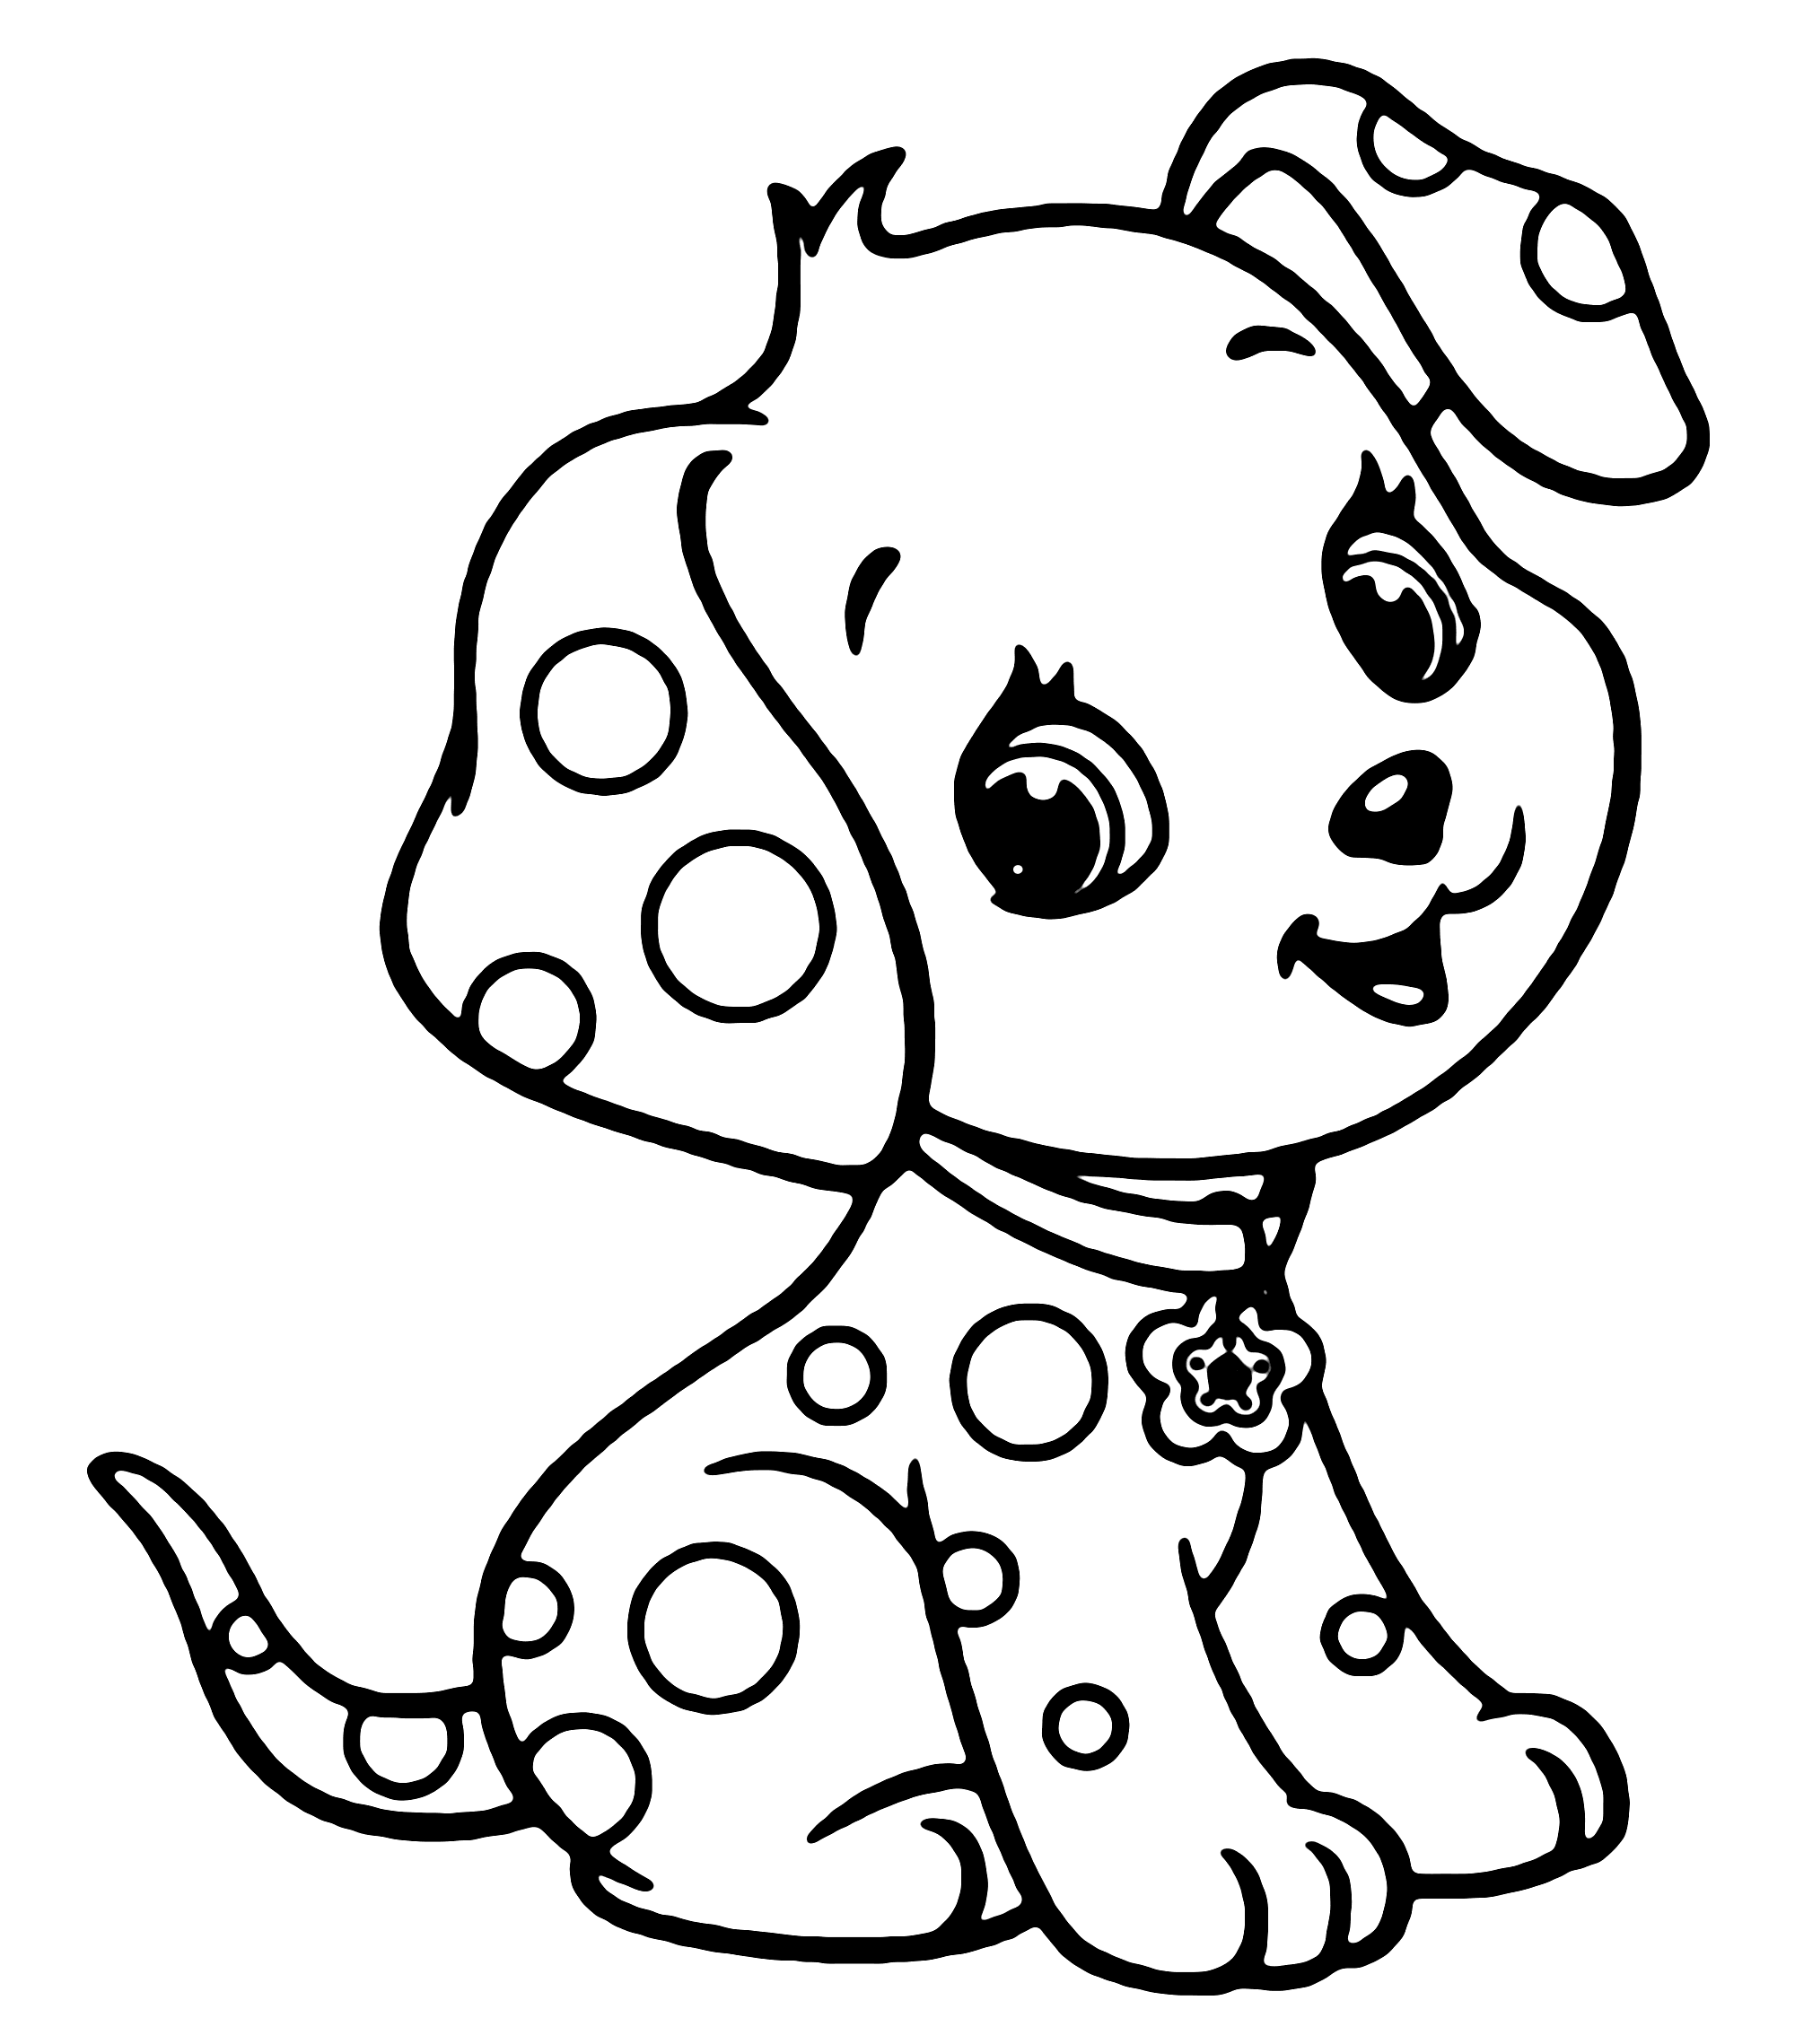 Free Printable Coloring Pages Of Dogs